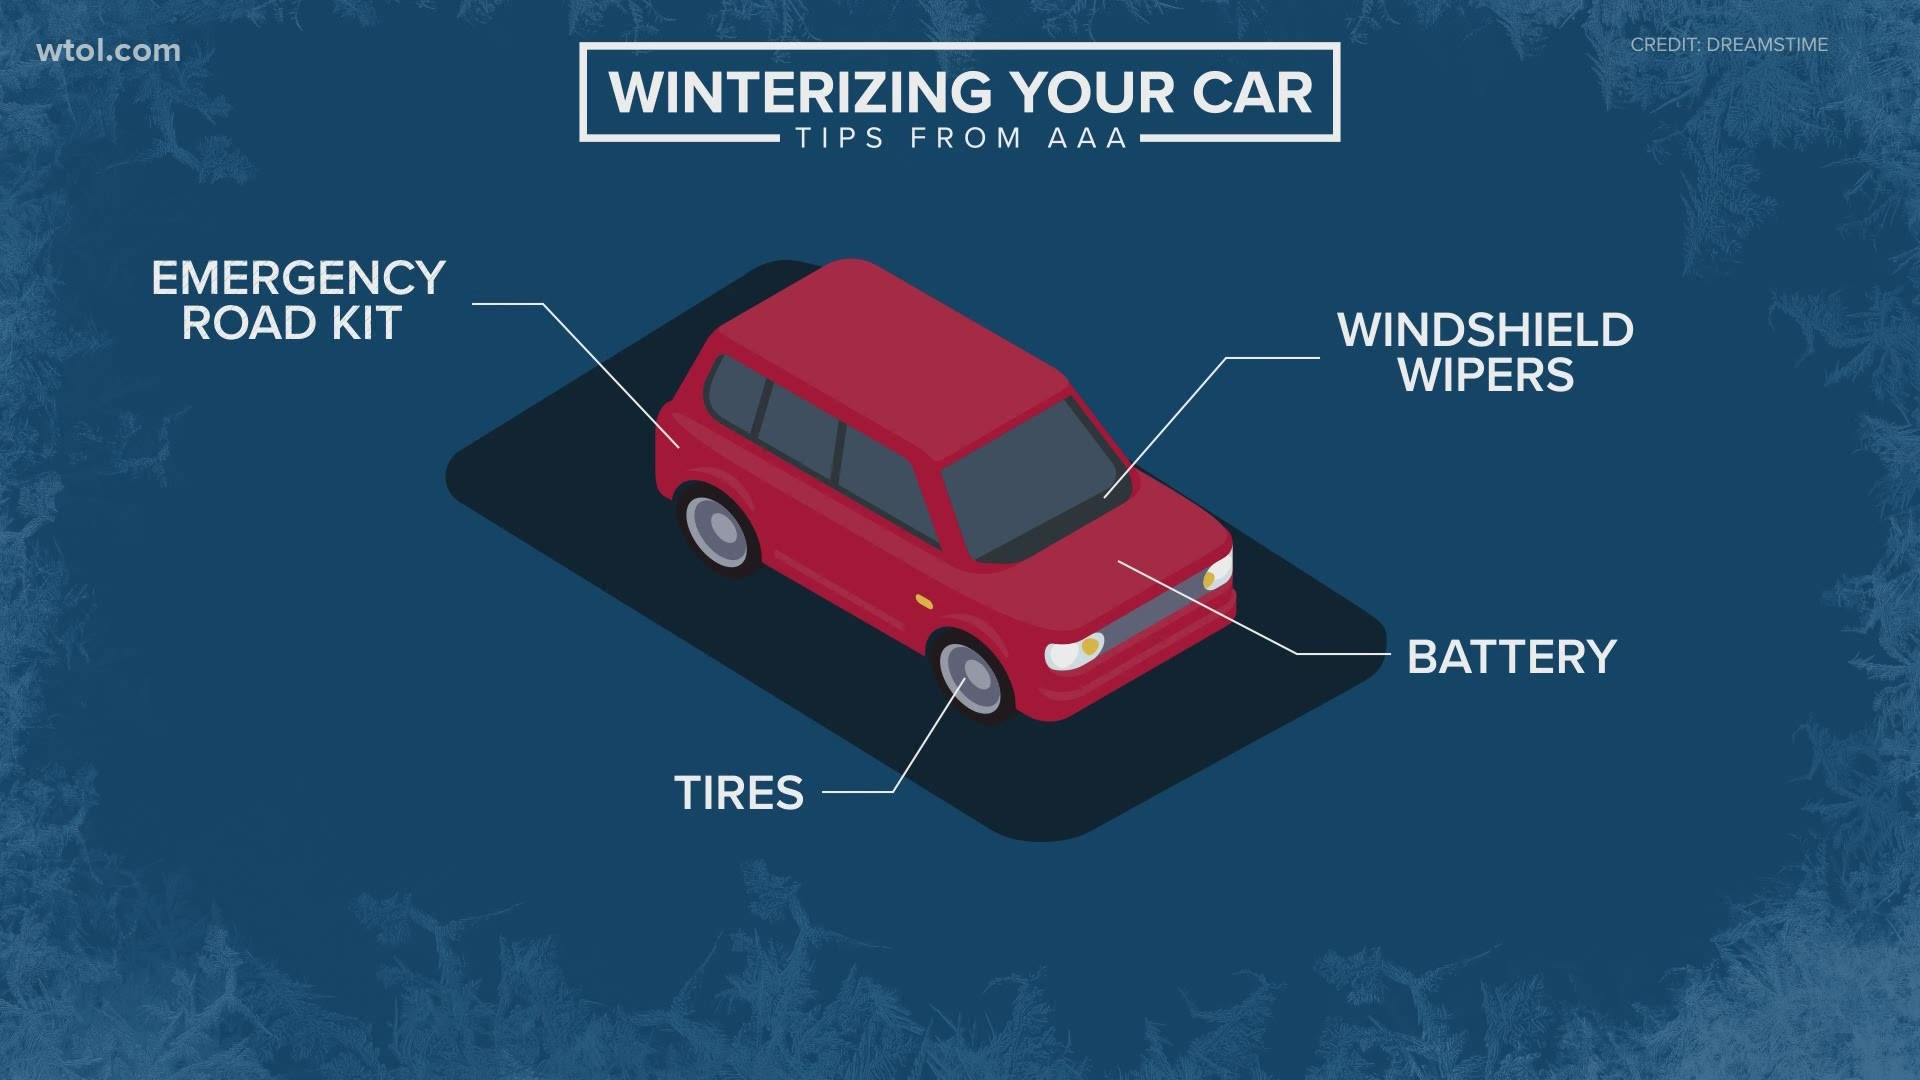 Here are some tips from AAA to get your car ready for our first winter storm of the season!